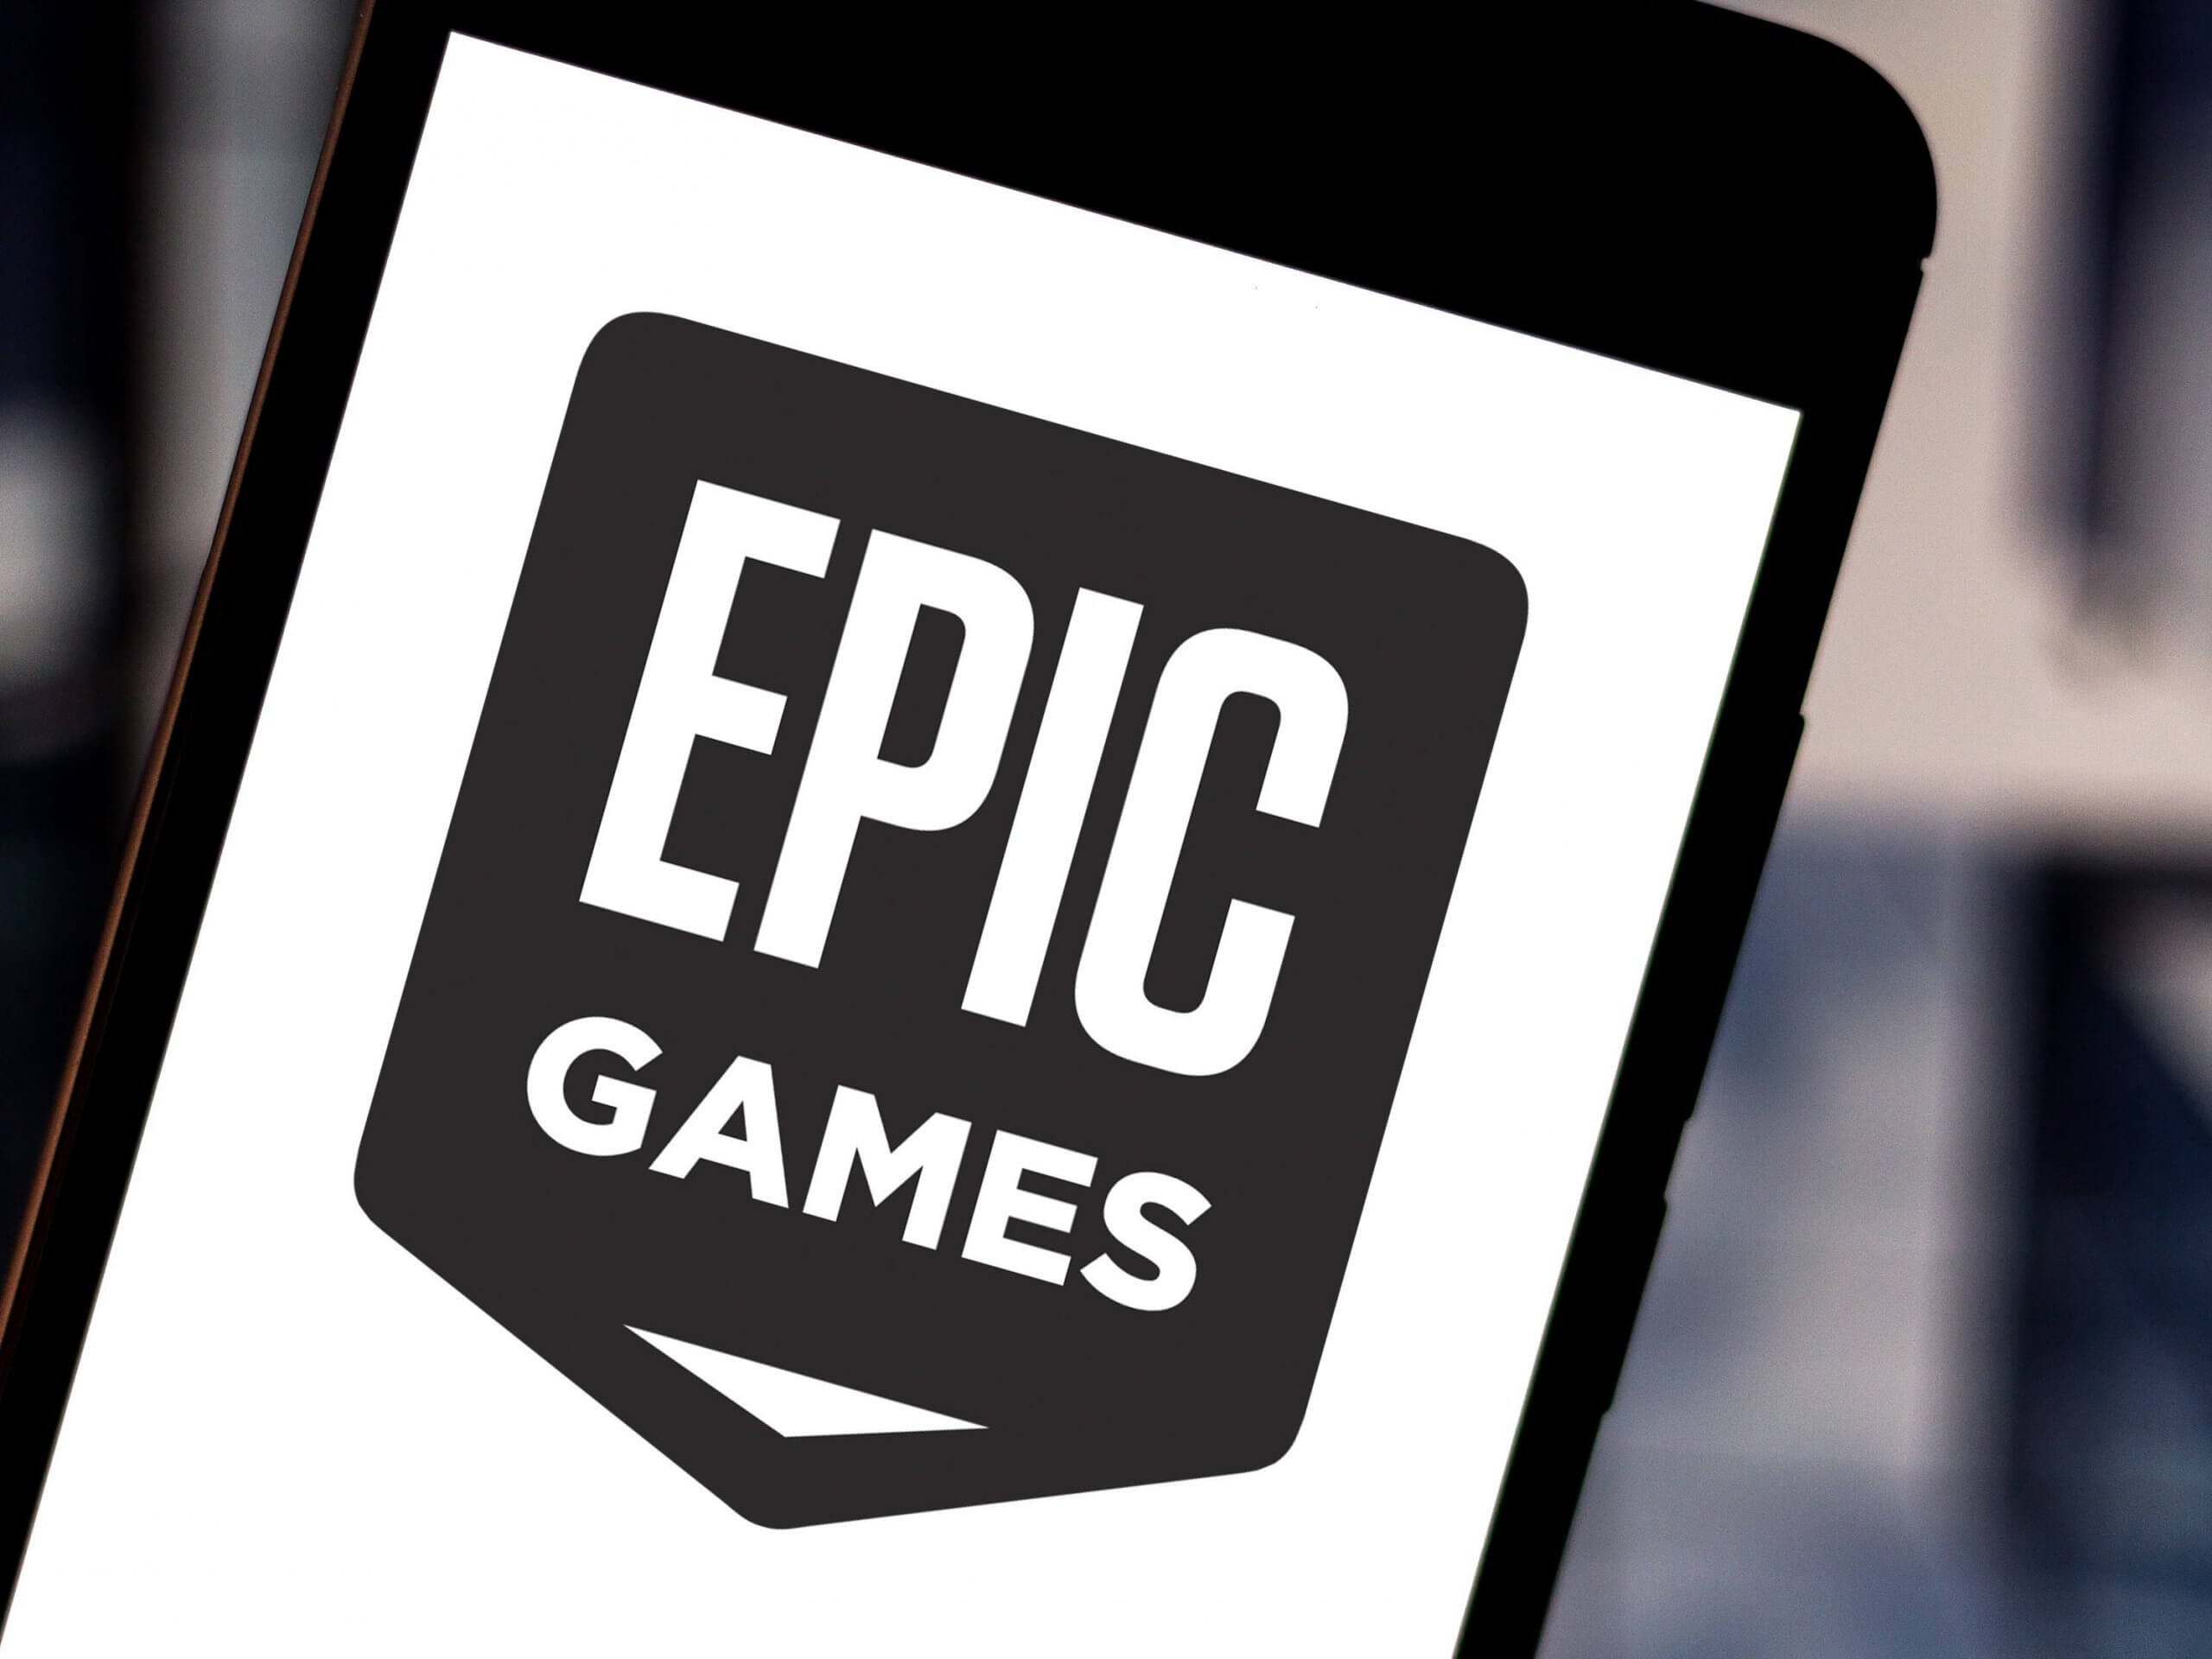 Epic Games, Gaming metaverse, Different from Facebook, Oyprice article, 2560x1920 HD Desktop